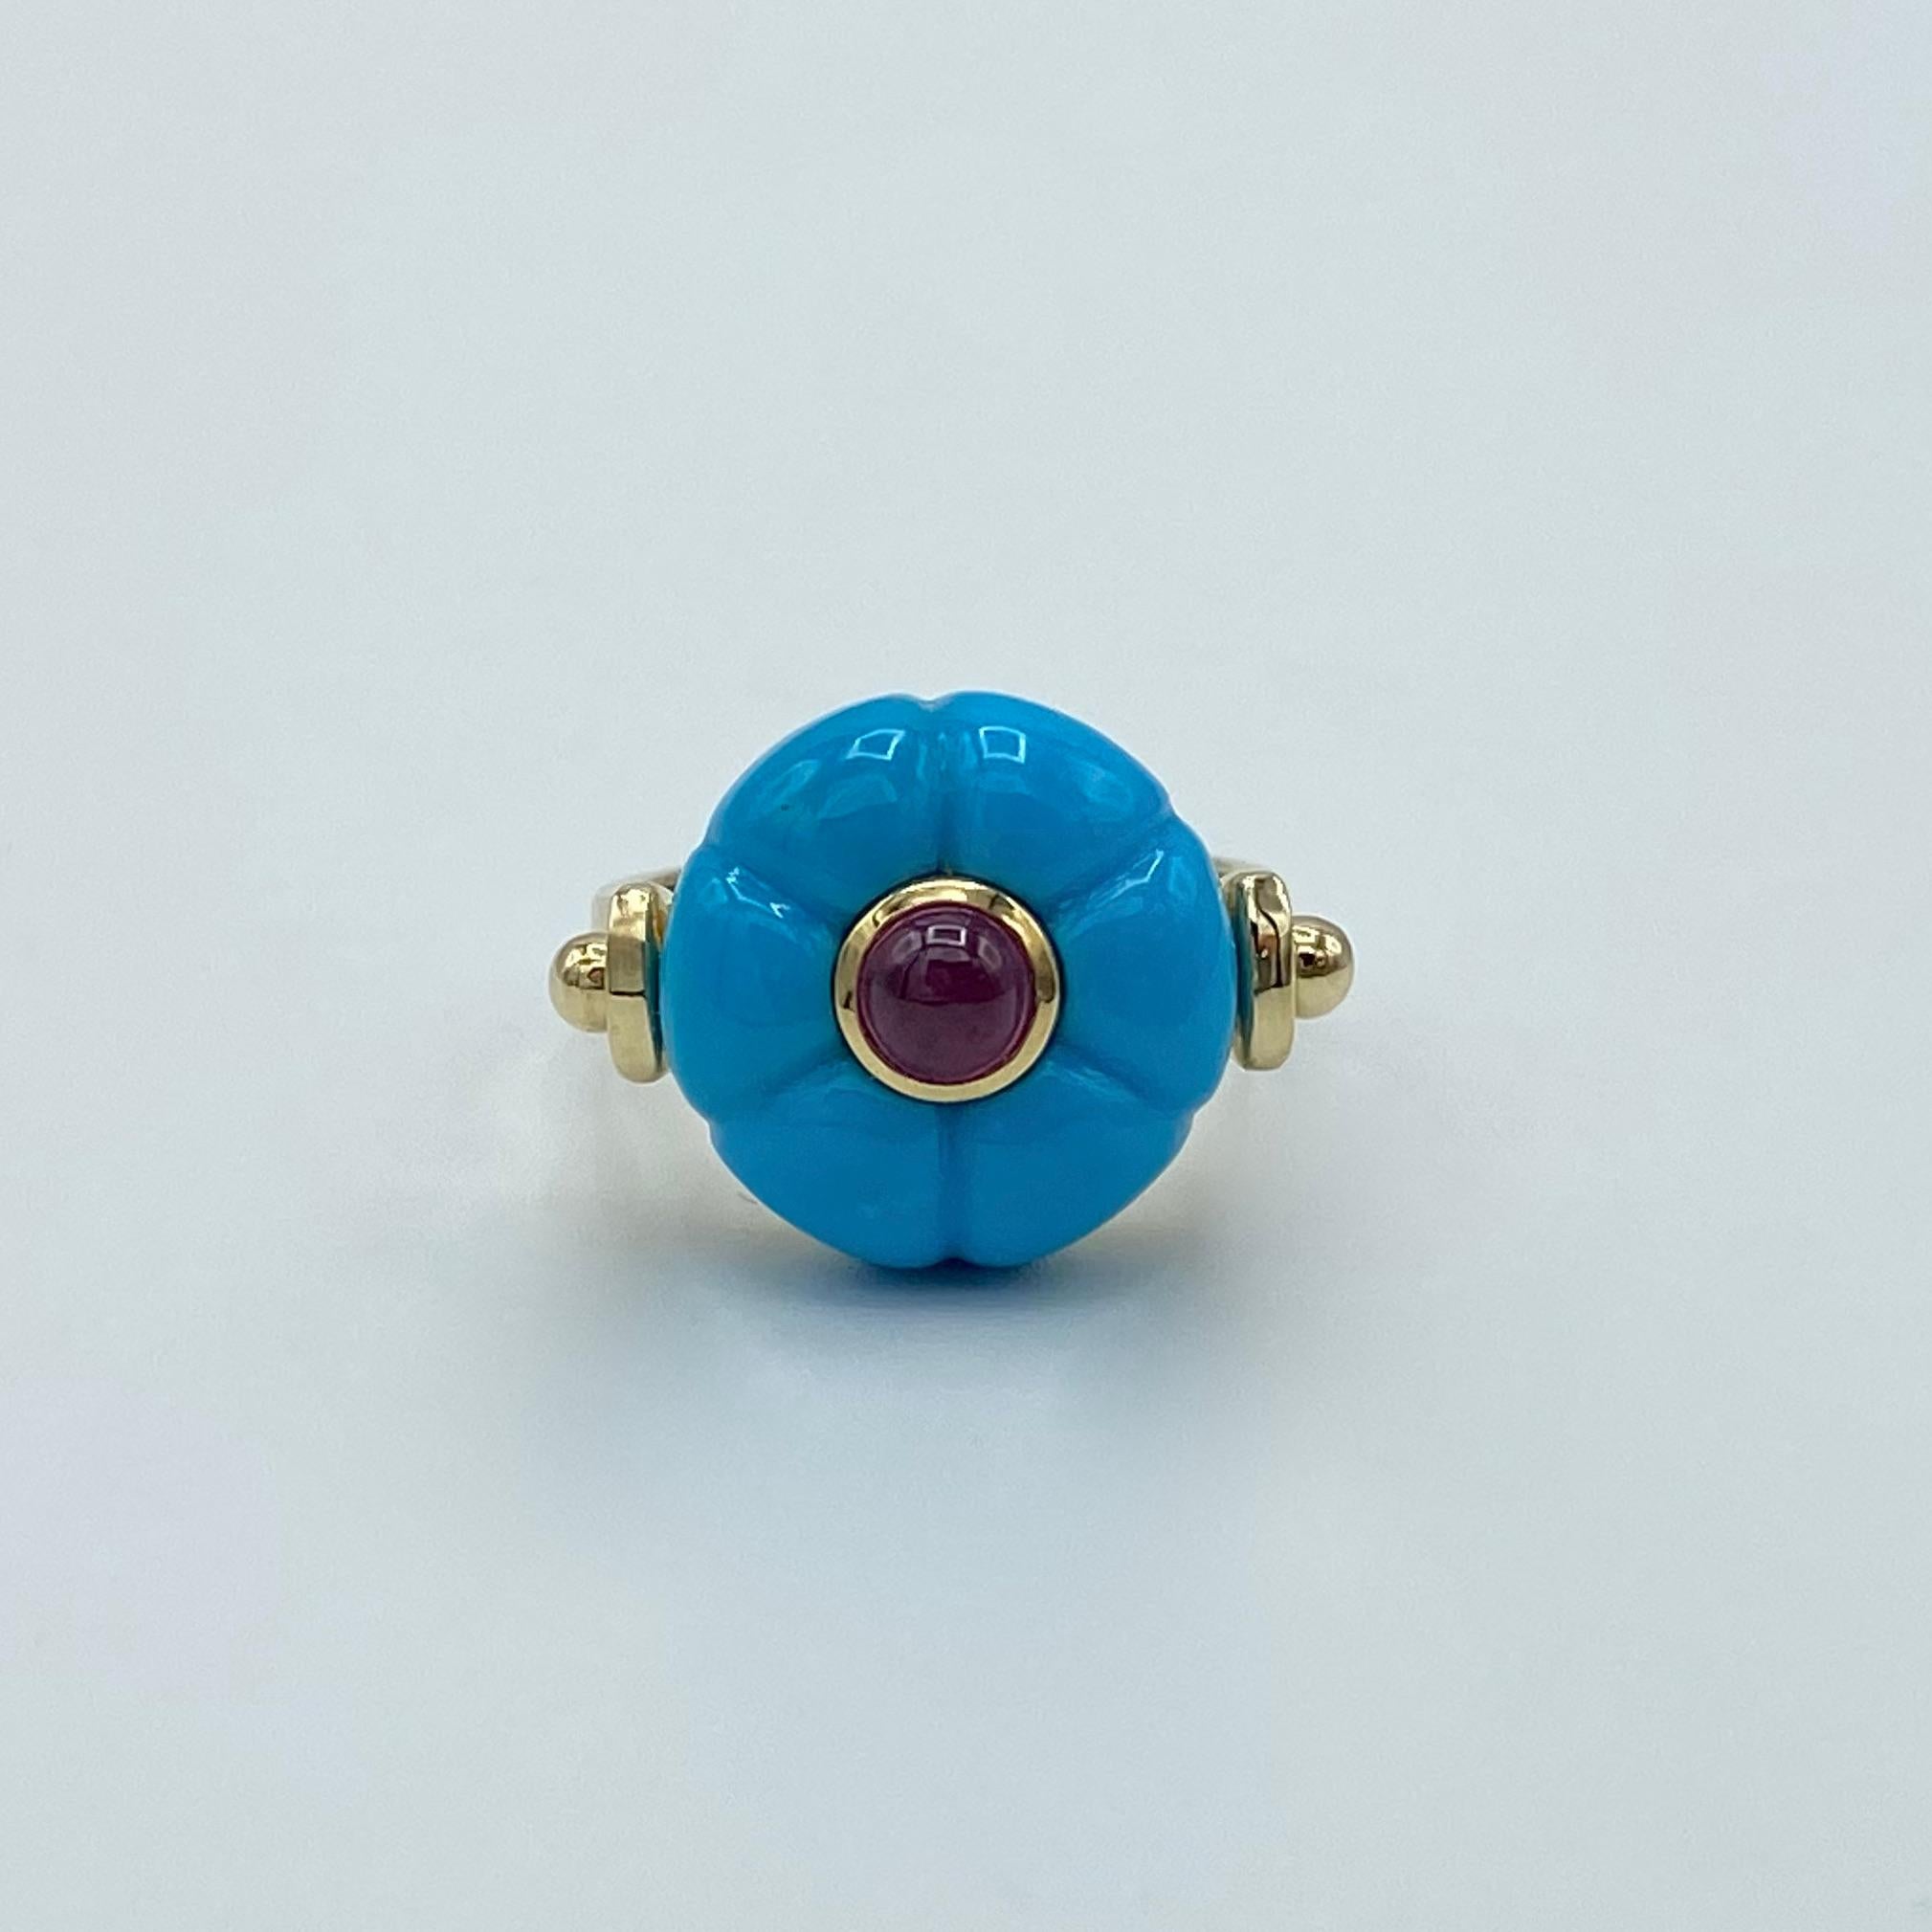 Made in Italy Gemstone Ruby Turquoise 18 Karat Gold Roman Style Ring
This ring has a design inspired by ancient Roman jewelry. The hand-cut central turquoise has an intense color and is native to Arizona.
The turquoise is as a domed flower and in